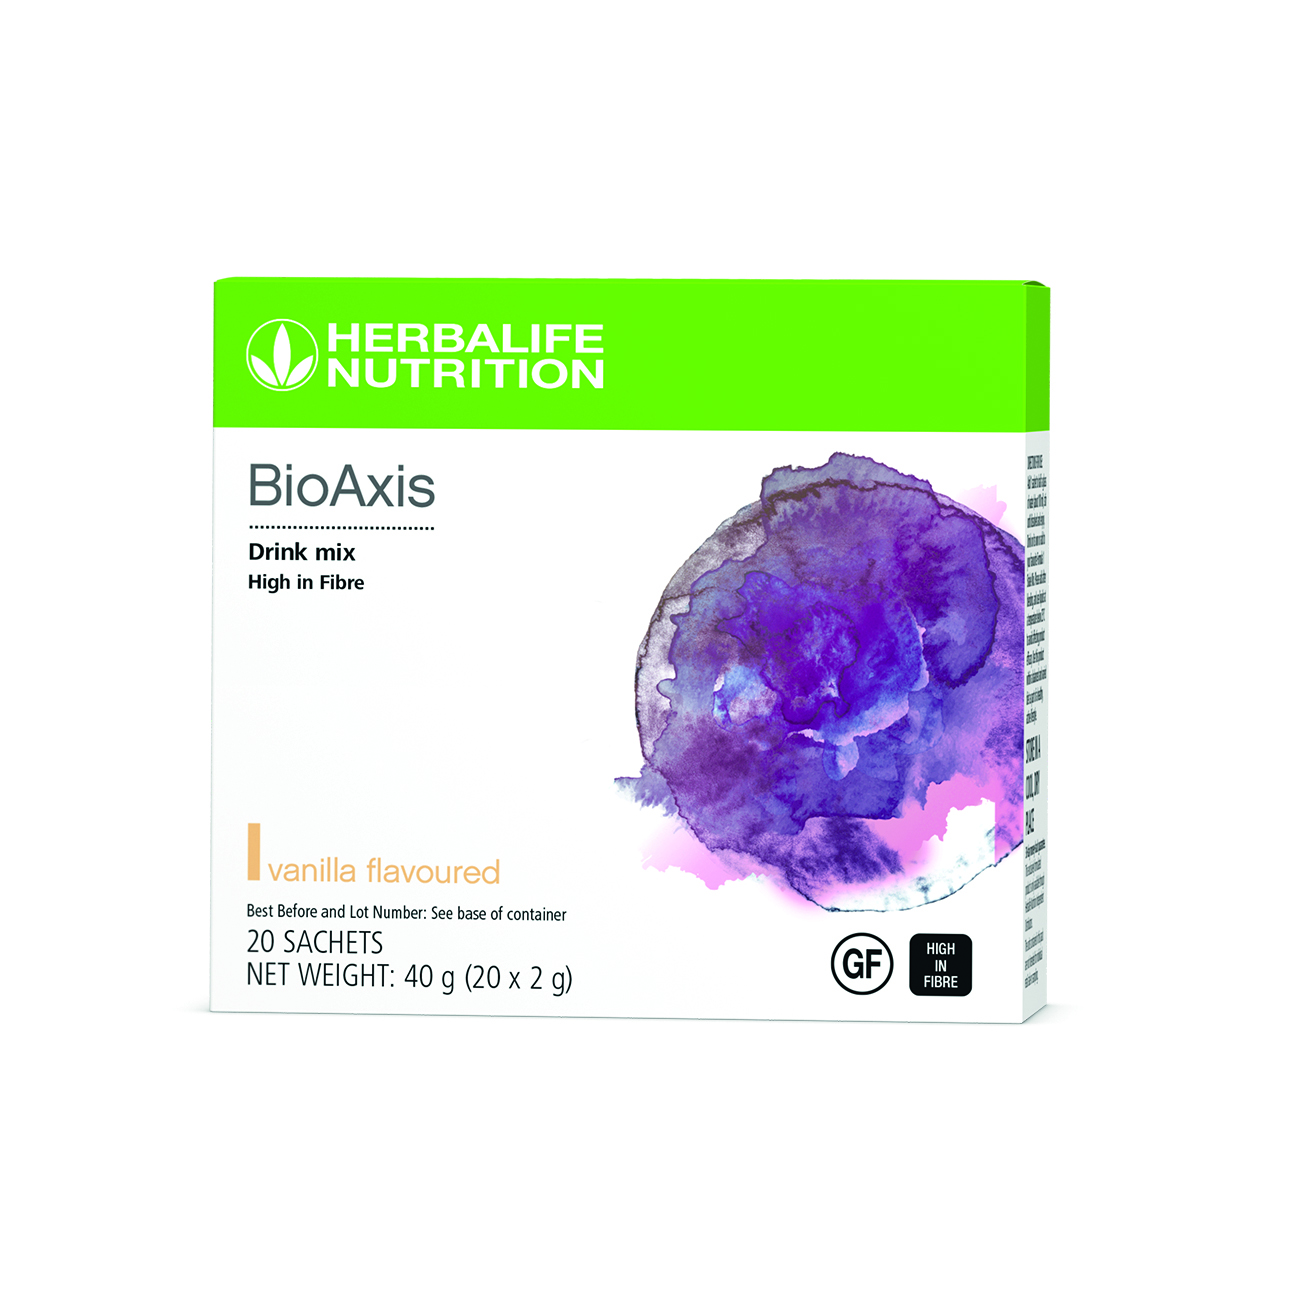 BioAxis, powdered food supplement formulated with a combination of probiotics and prebiotic fibre.